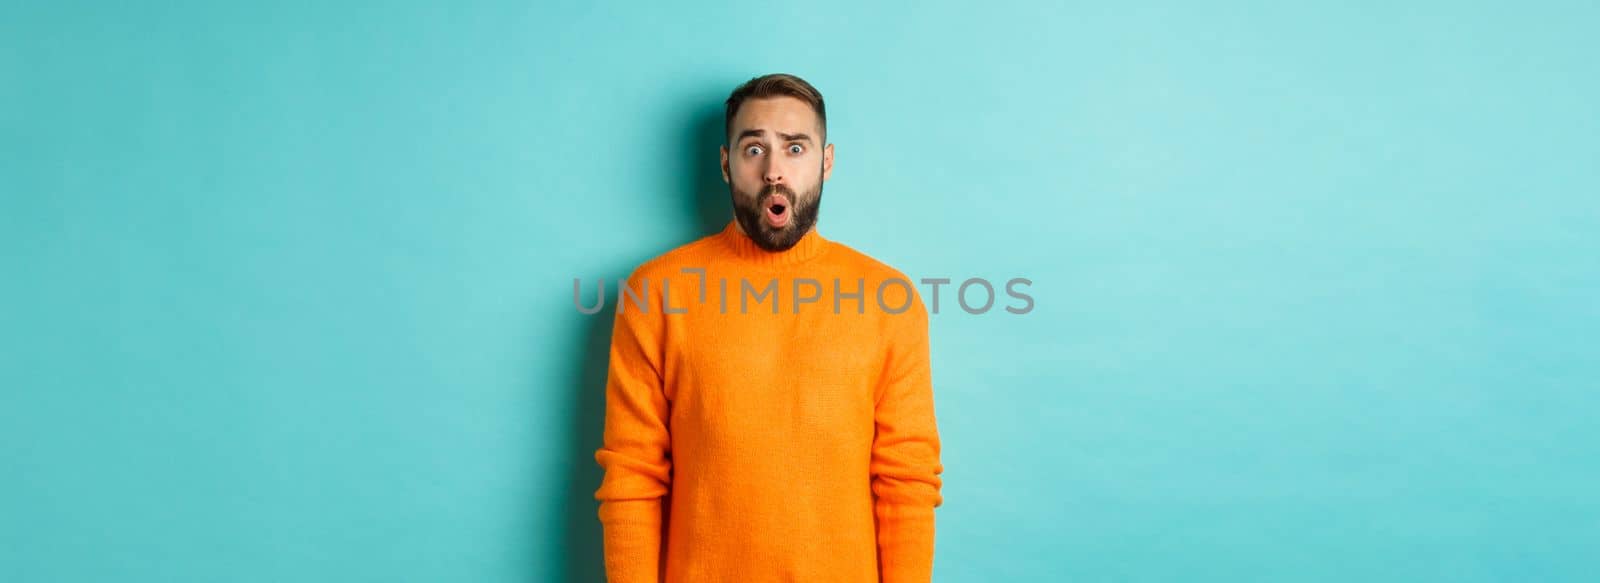 Shocked and confused man looking in awe at promo offer, standing near copy space on turquoise background.